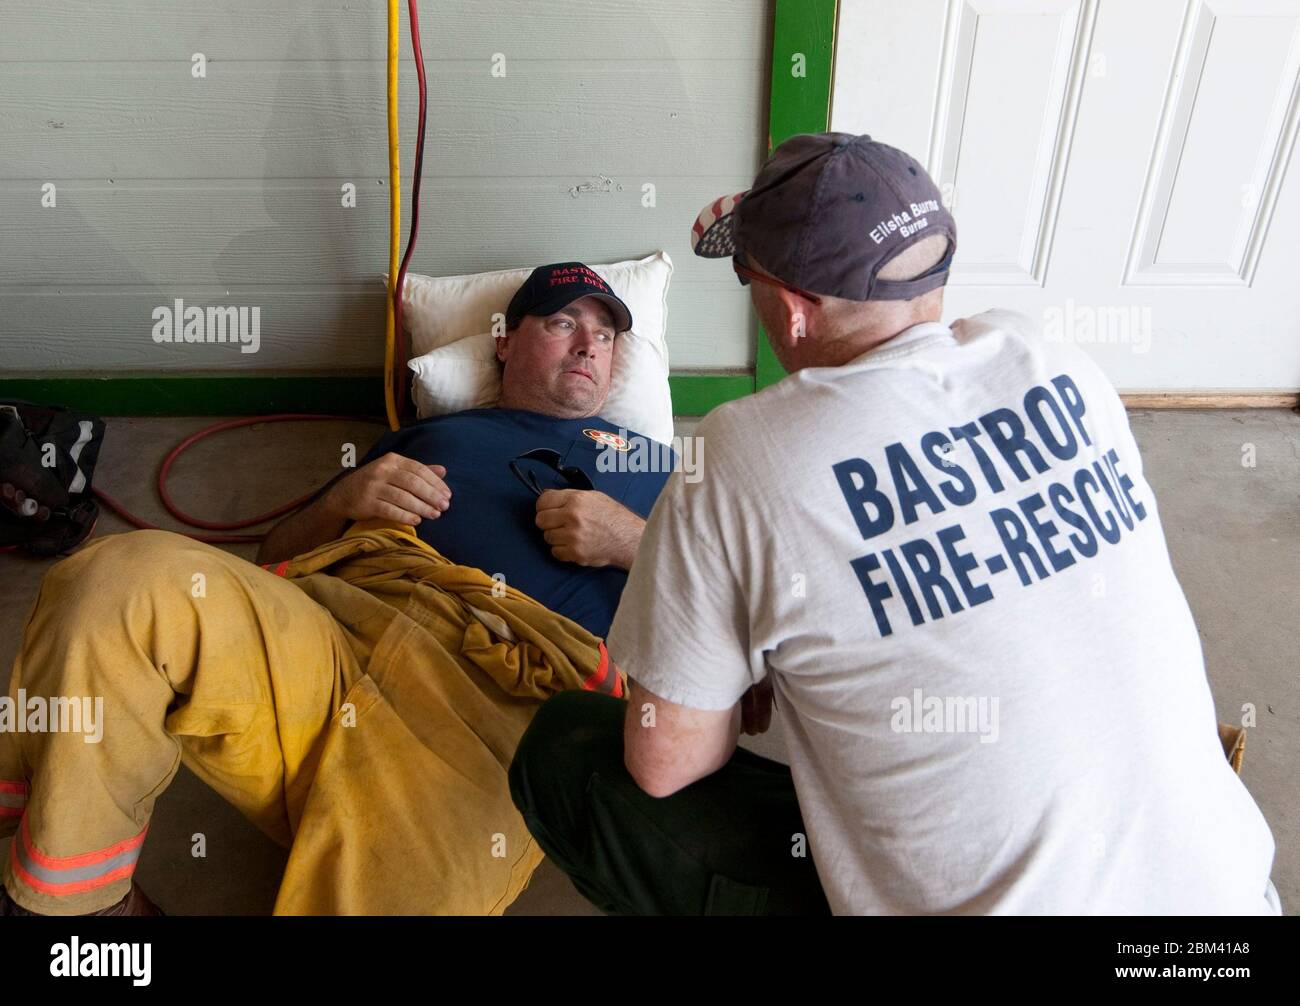 Bastrop Texas USA, September 7, 2011: Firefighters take a break at their fire station after working to control forest fires in the area for three days. The fires destroyed more than 1,400 homes and buildings and scorched more than 38,000 acres.  ©Marjorie Kamys Cotera/Daemmrich Photography Stock Photo